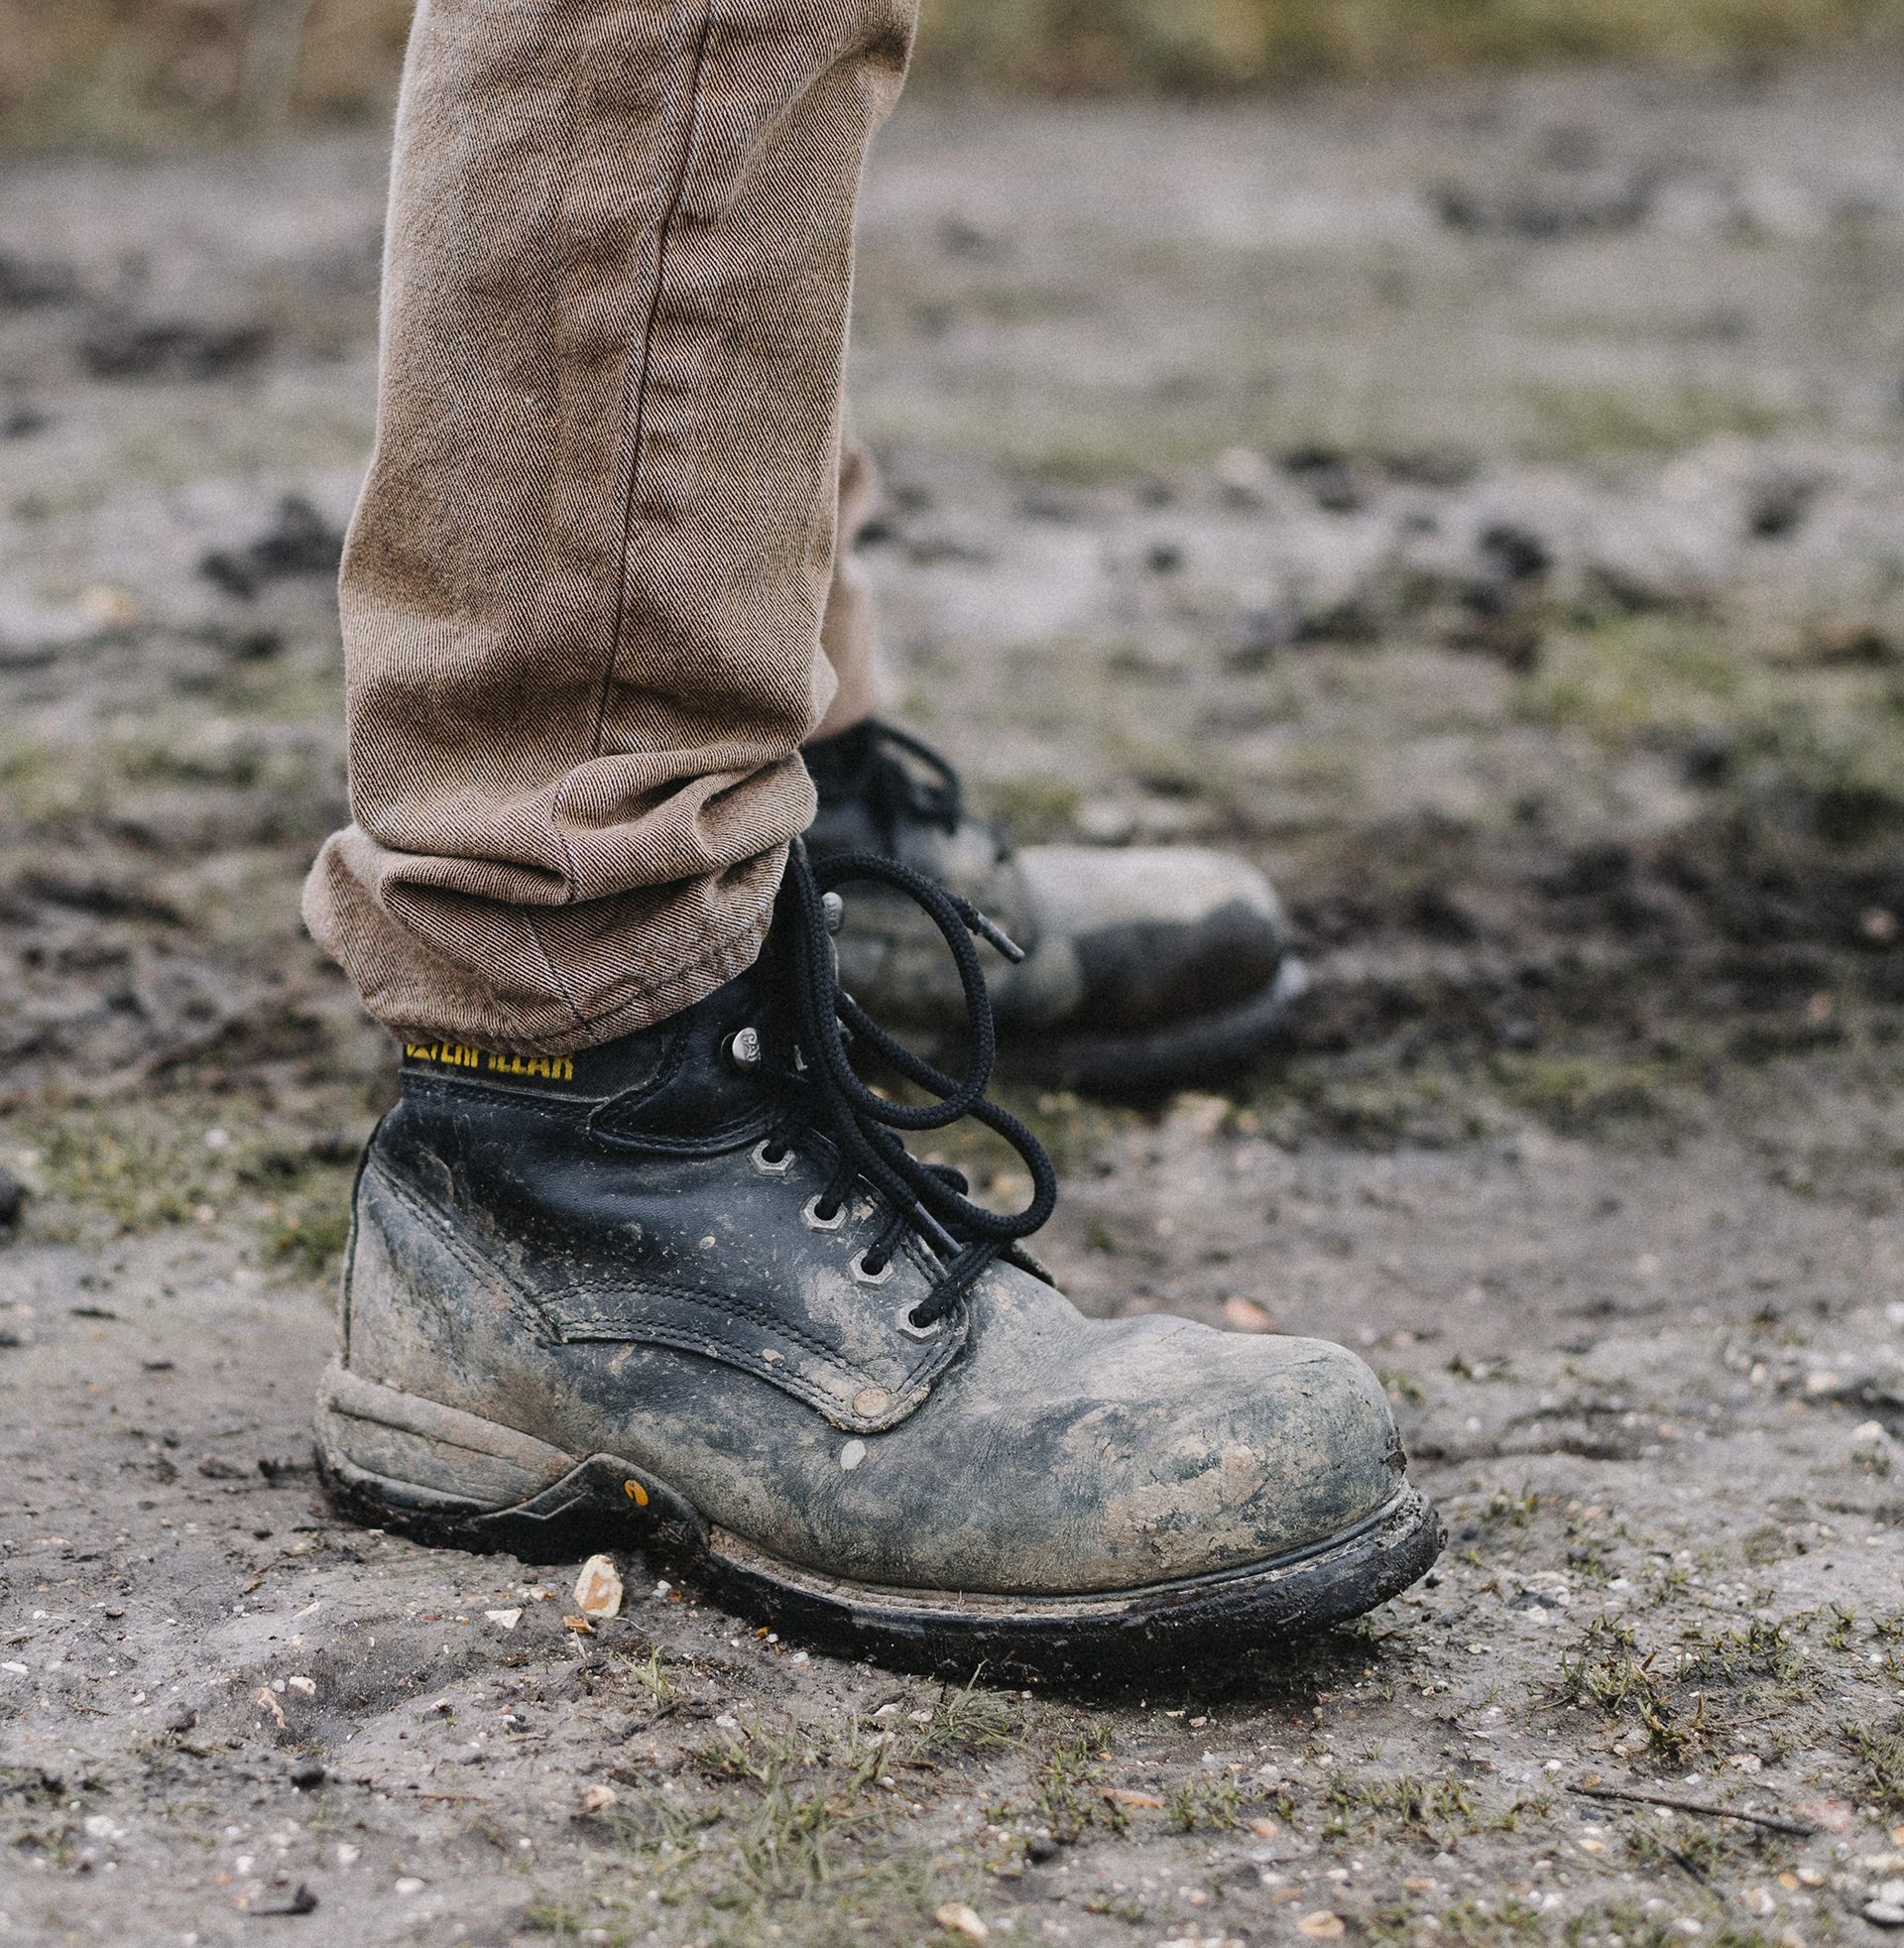 work boots in mud while surveying